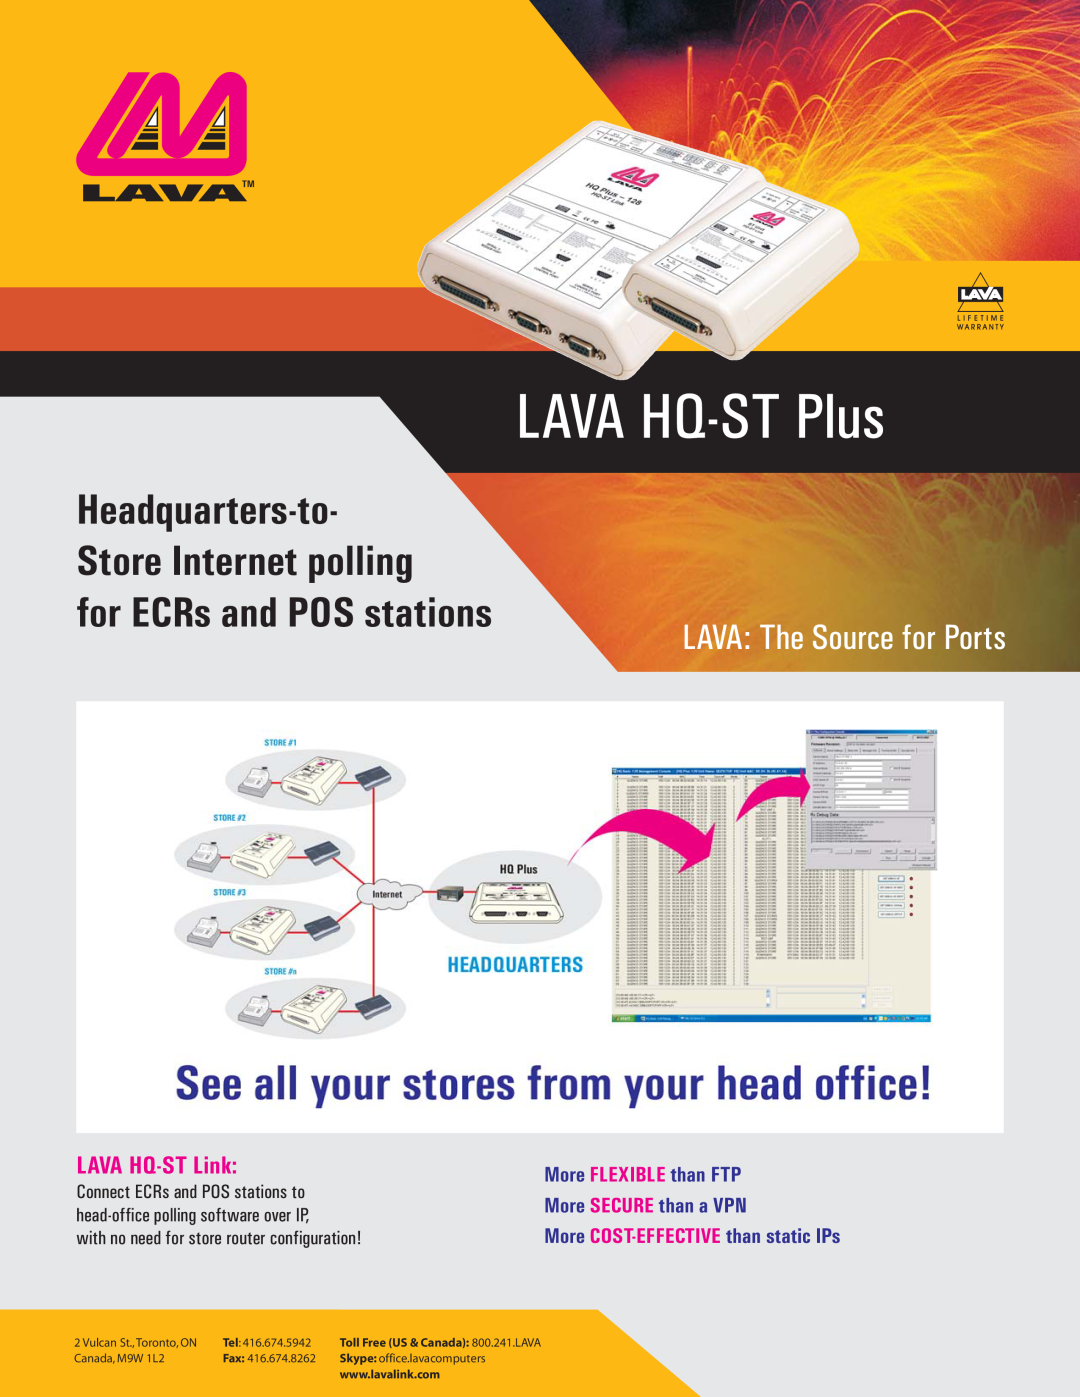 Lava Computer manual LAVA HQ-ST Plus, for ECRs and POS stations, LAVA The Source for Ports, LAVA HQ-ST Link 